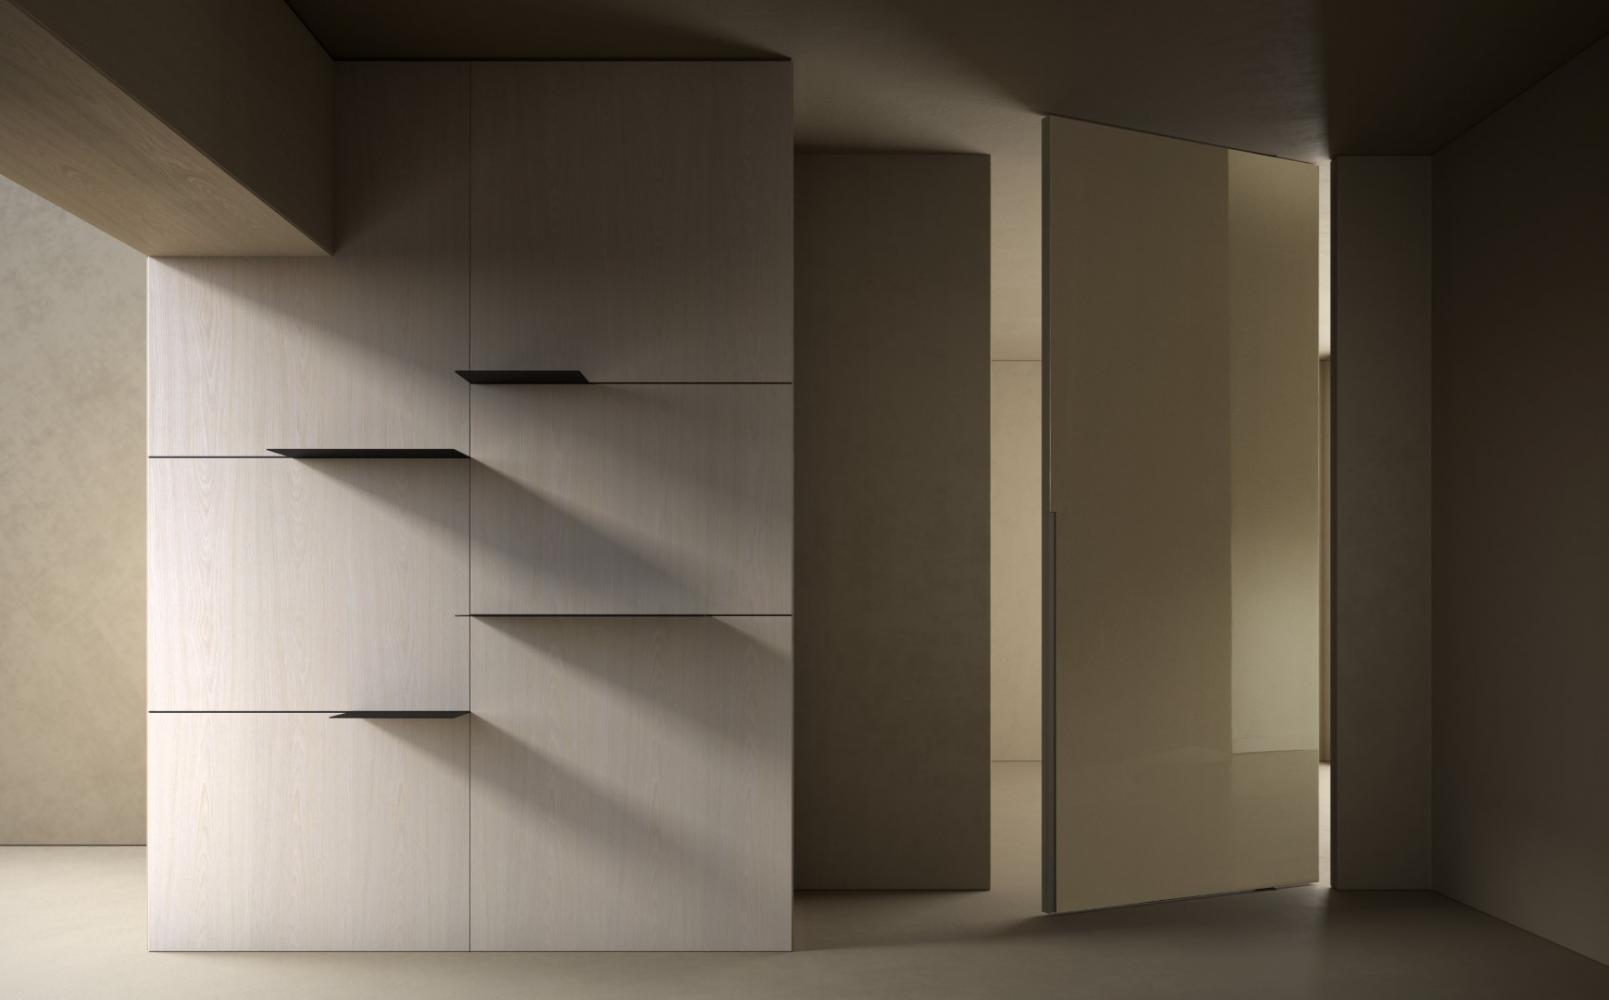 laurameroni made to measure integrated wall panels in plain wood